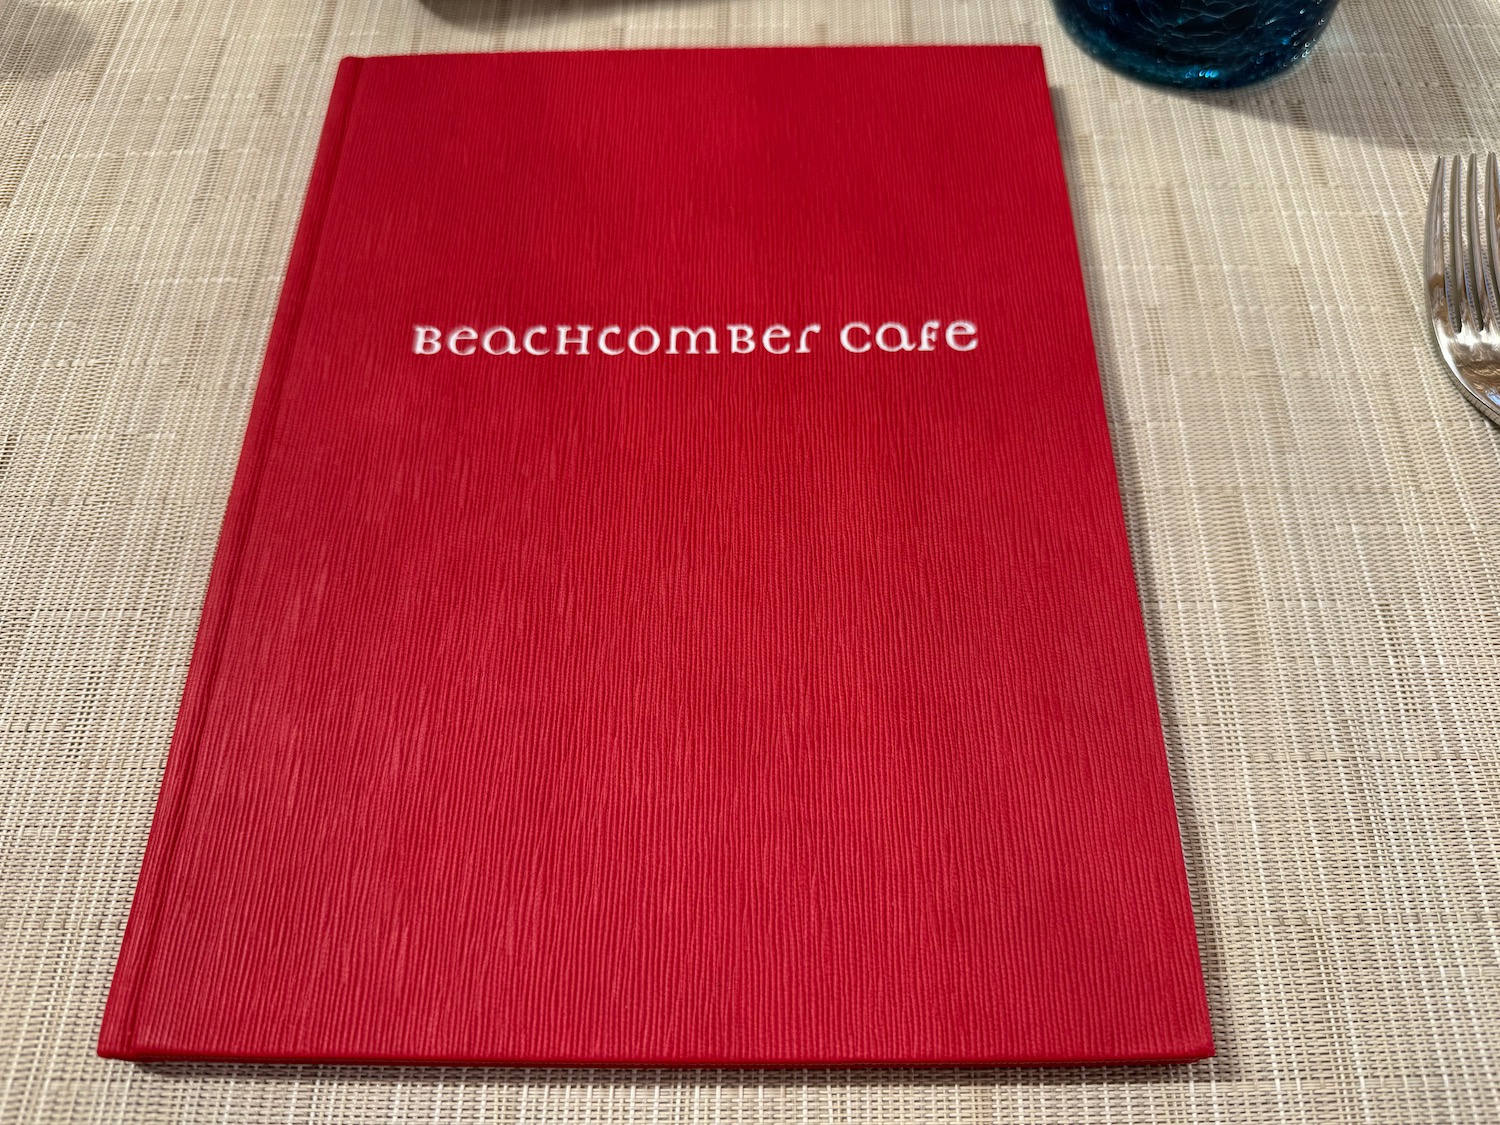 a red menu on a table